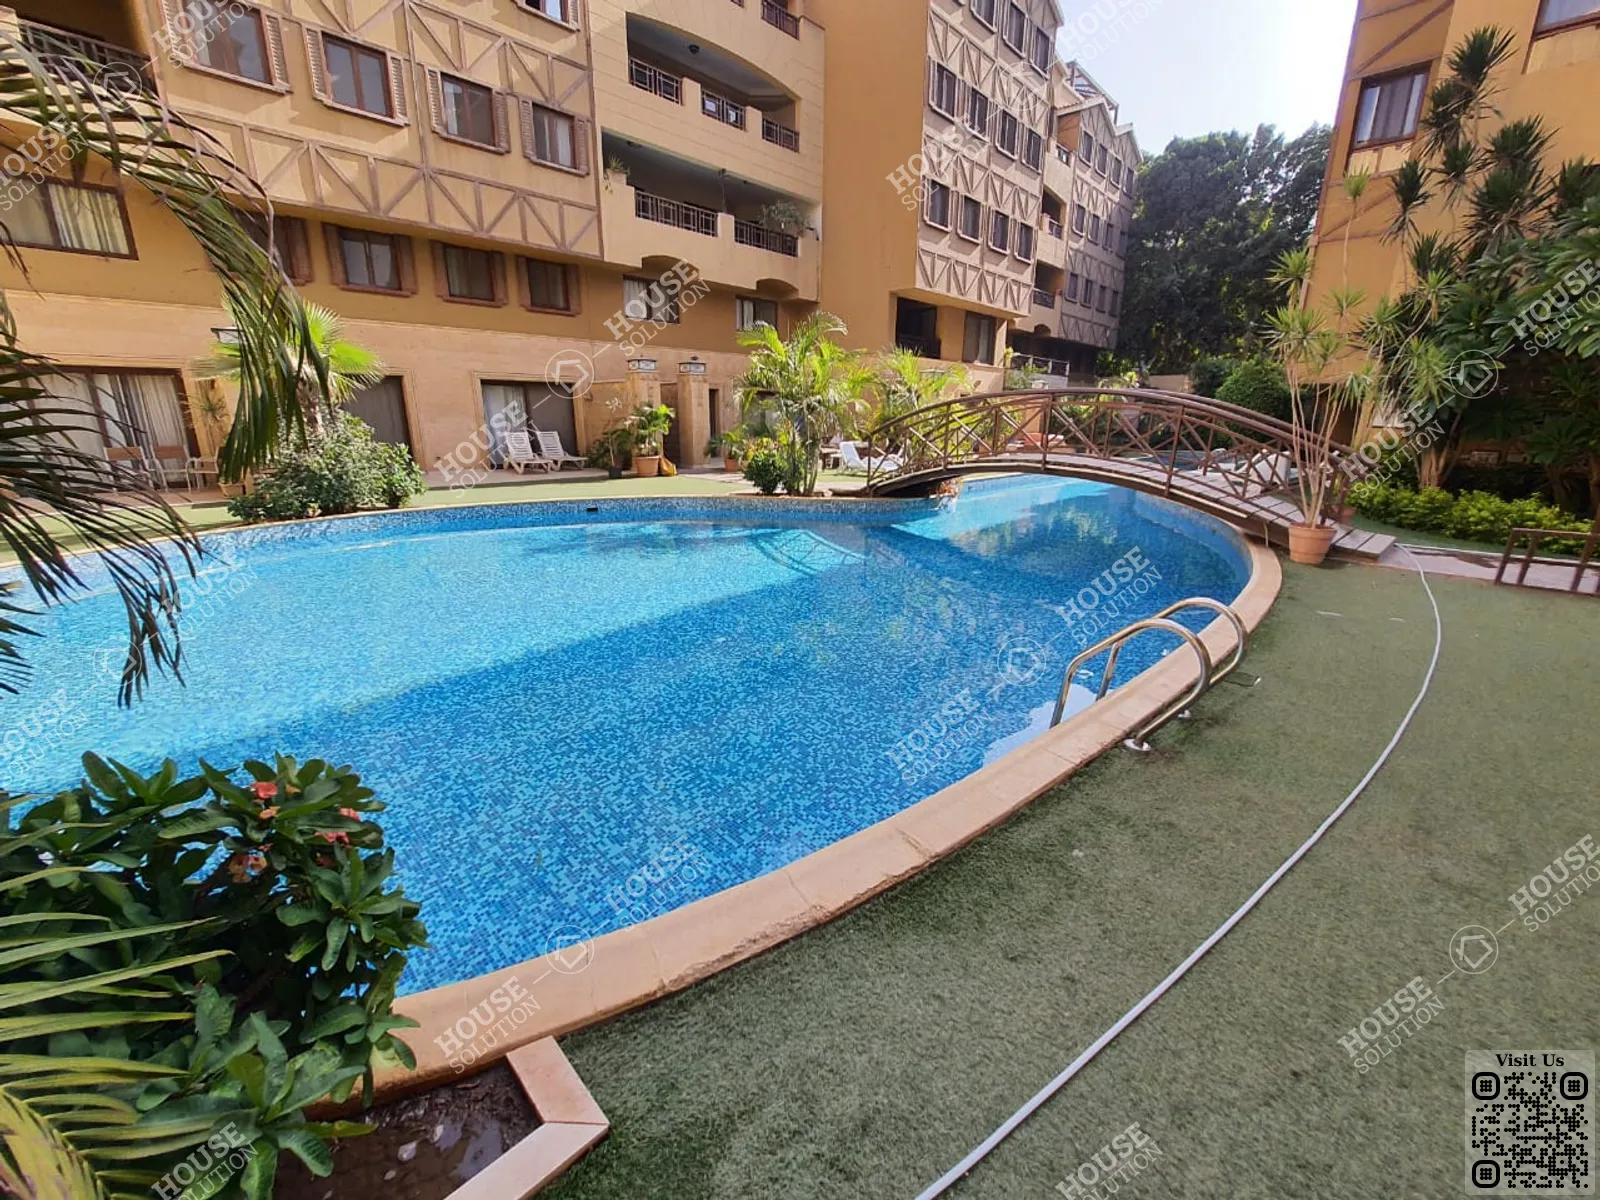 SHARED SWIMMING POOL  @ Apartments For Rent In Maadi Maadi Sarayat Area: 180 m² consists of 3 Bedrooms 3 Bathrooms Furnished 5 stars #5499-0